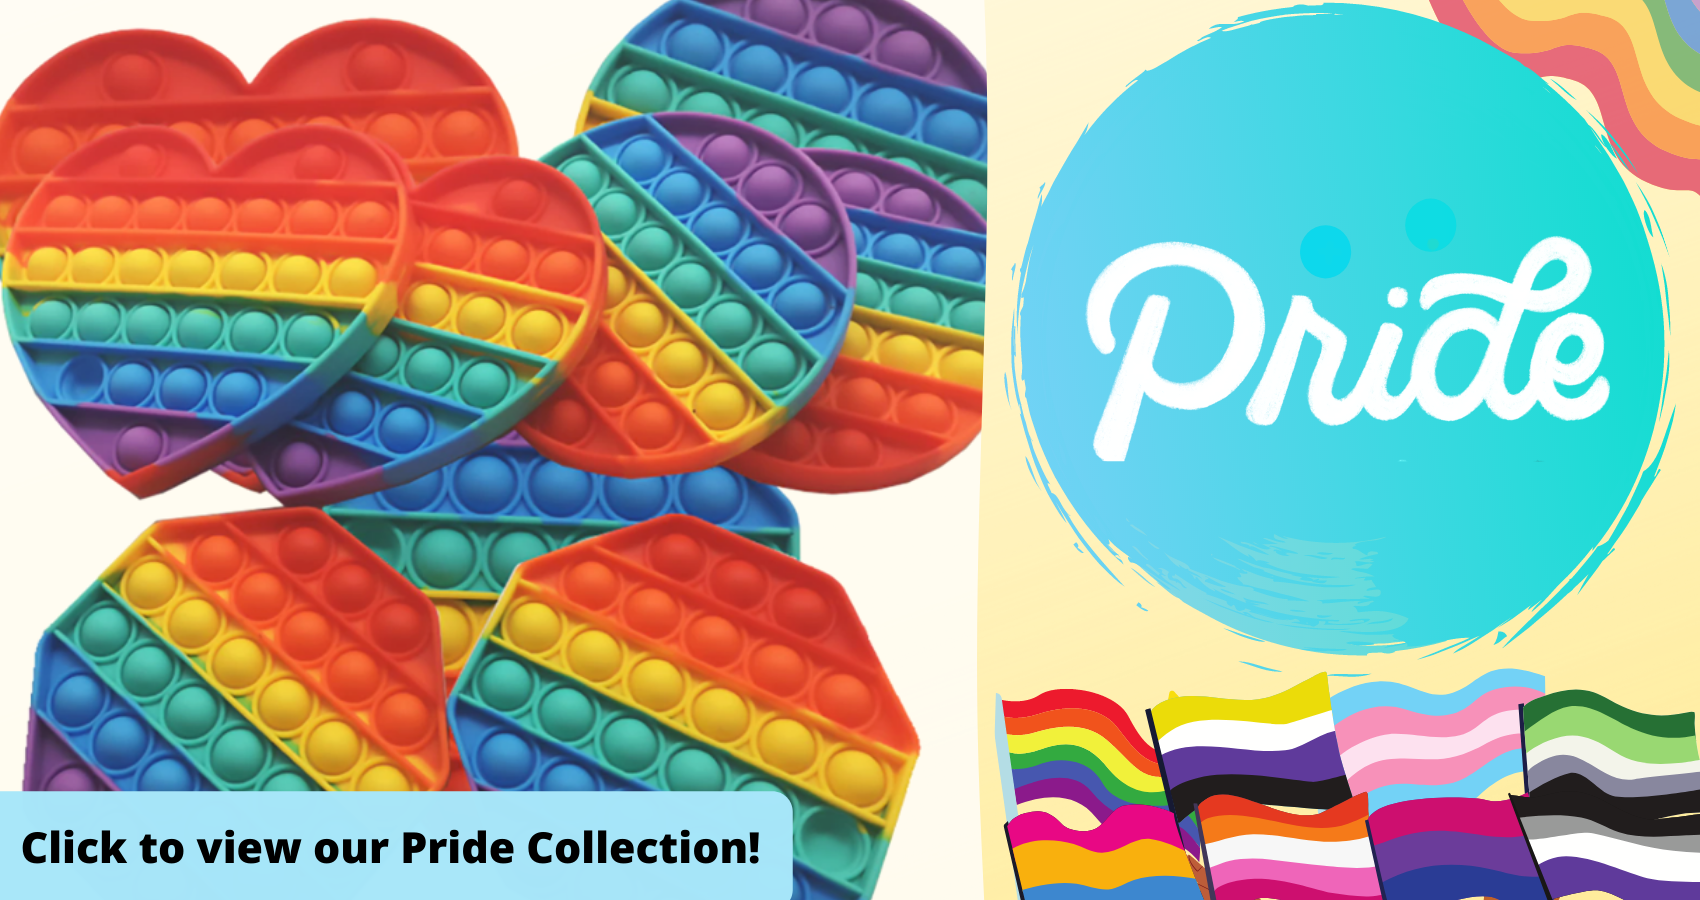 On the left, several rainbow bubble pop fidget toys. On the right, Pride flags. Text reads: "Pride. Click to view our Pride collection."